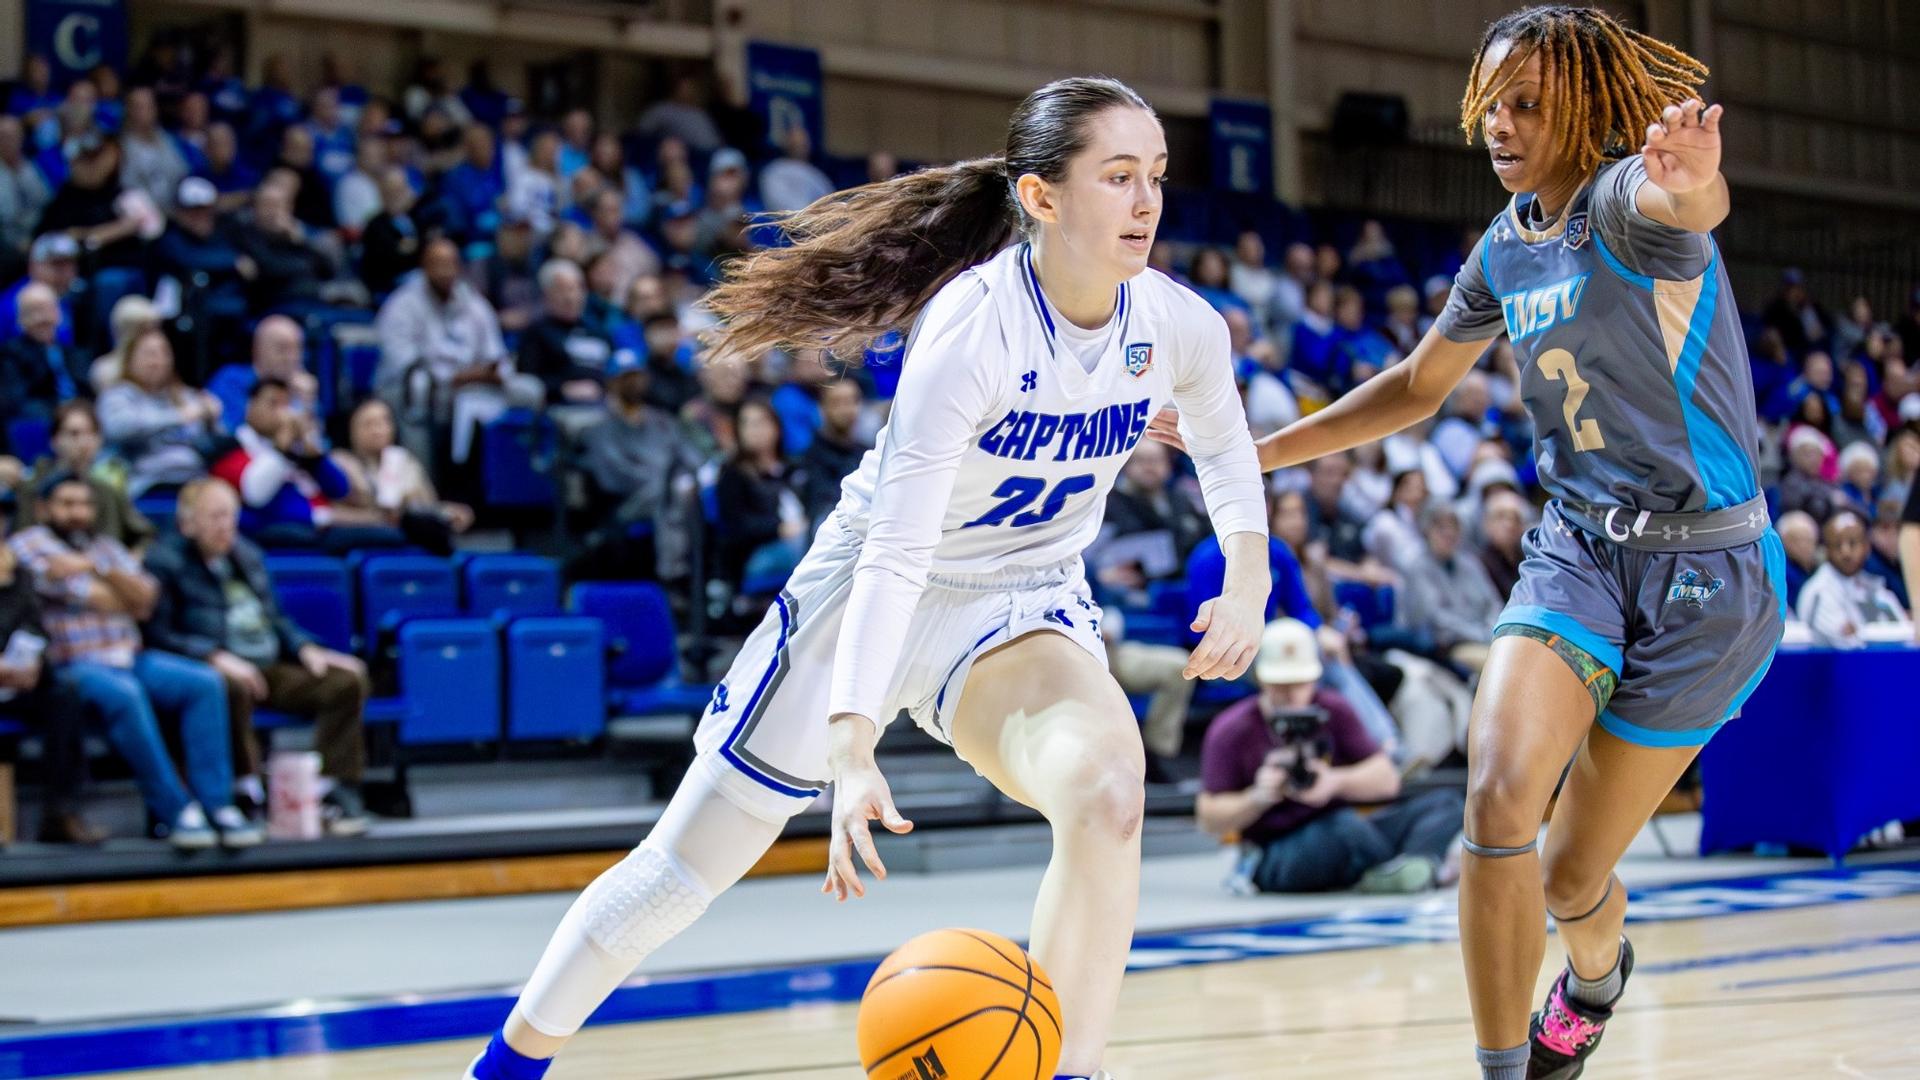 No. 4 CNU Showcases Depth in Historic Opening Round Win Over Mount Saint Vincent, 104-52